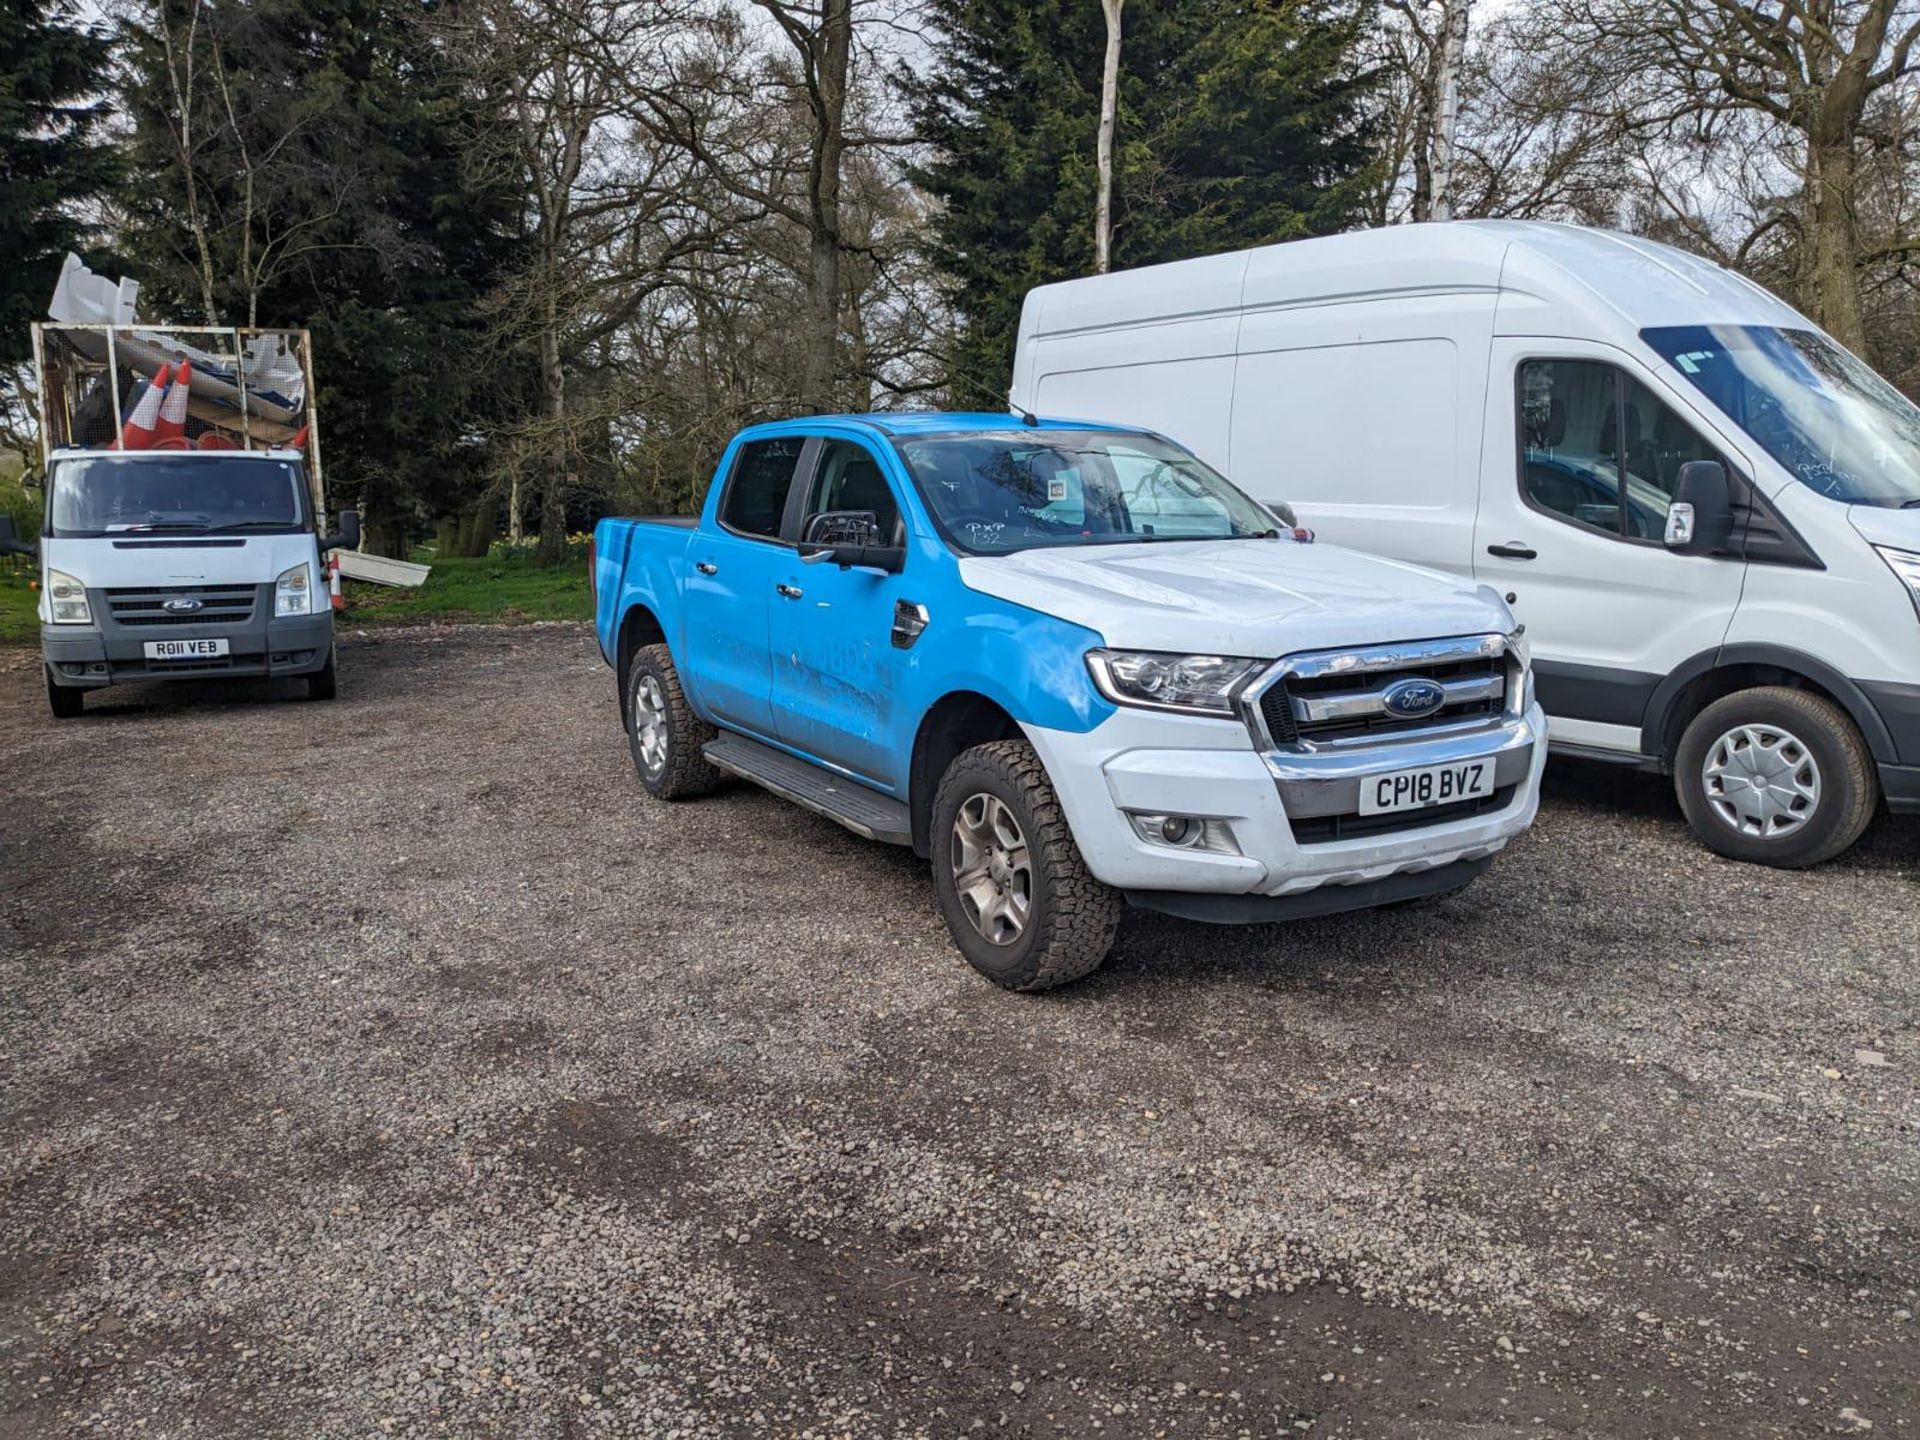 2018 18 FORD RANGER LIMITED PICK - 133K MILES - LEATHER SEATS - ALLOY WHEELS WITH BF GOODRICH TYRES - Image 4 of 4